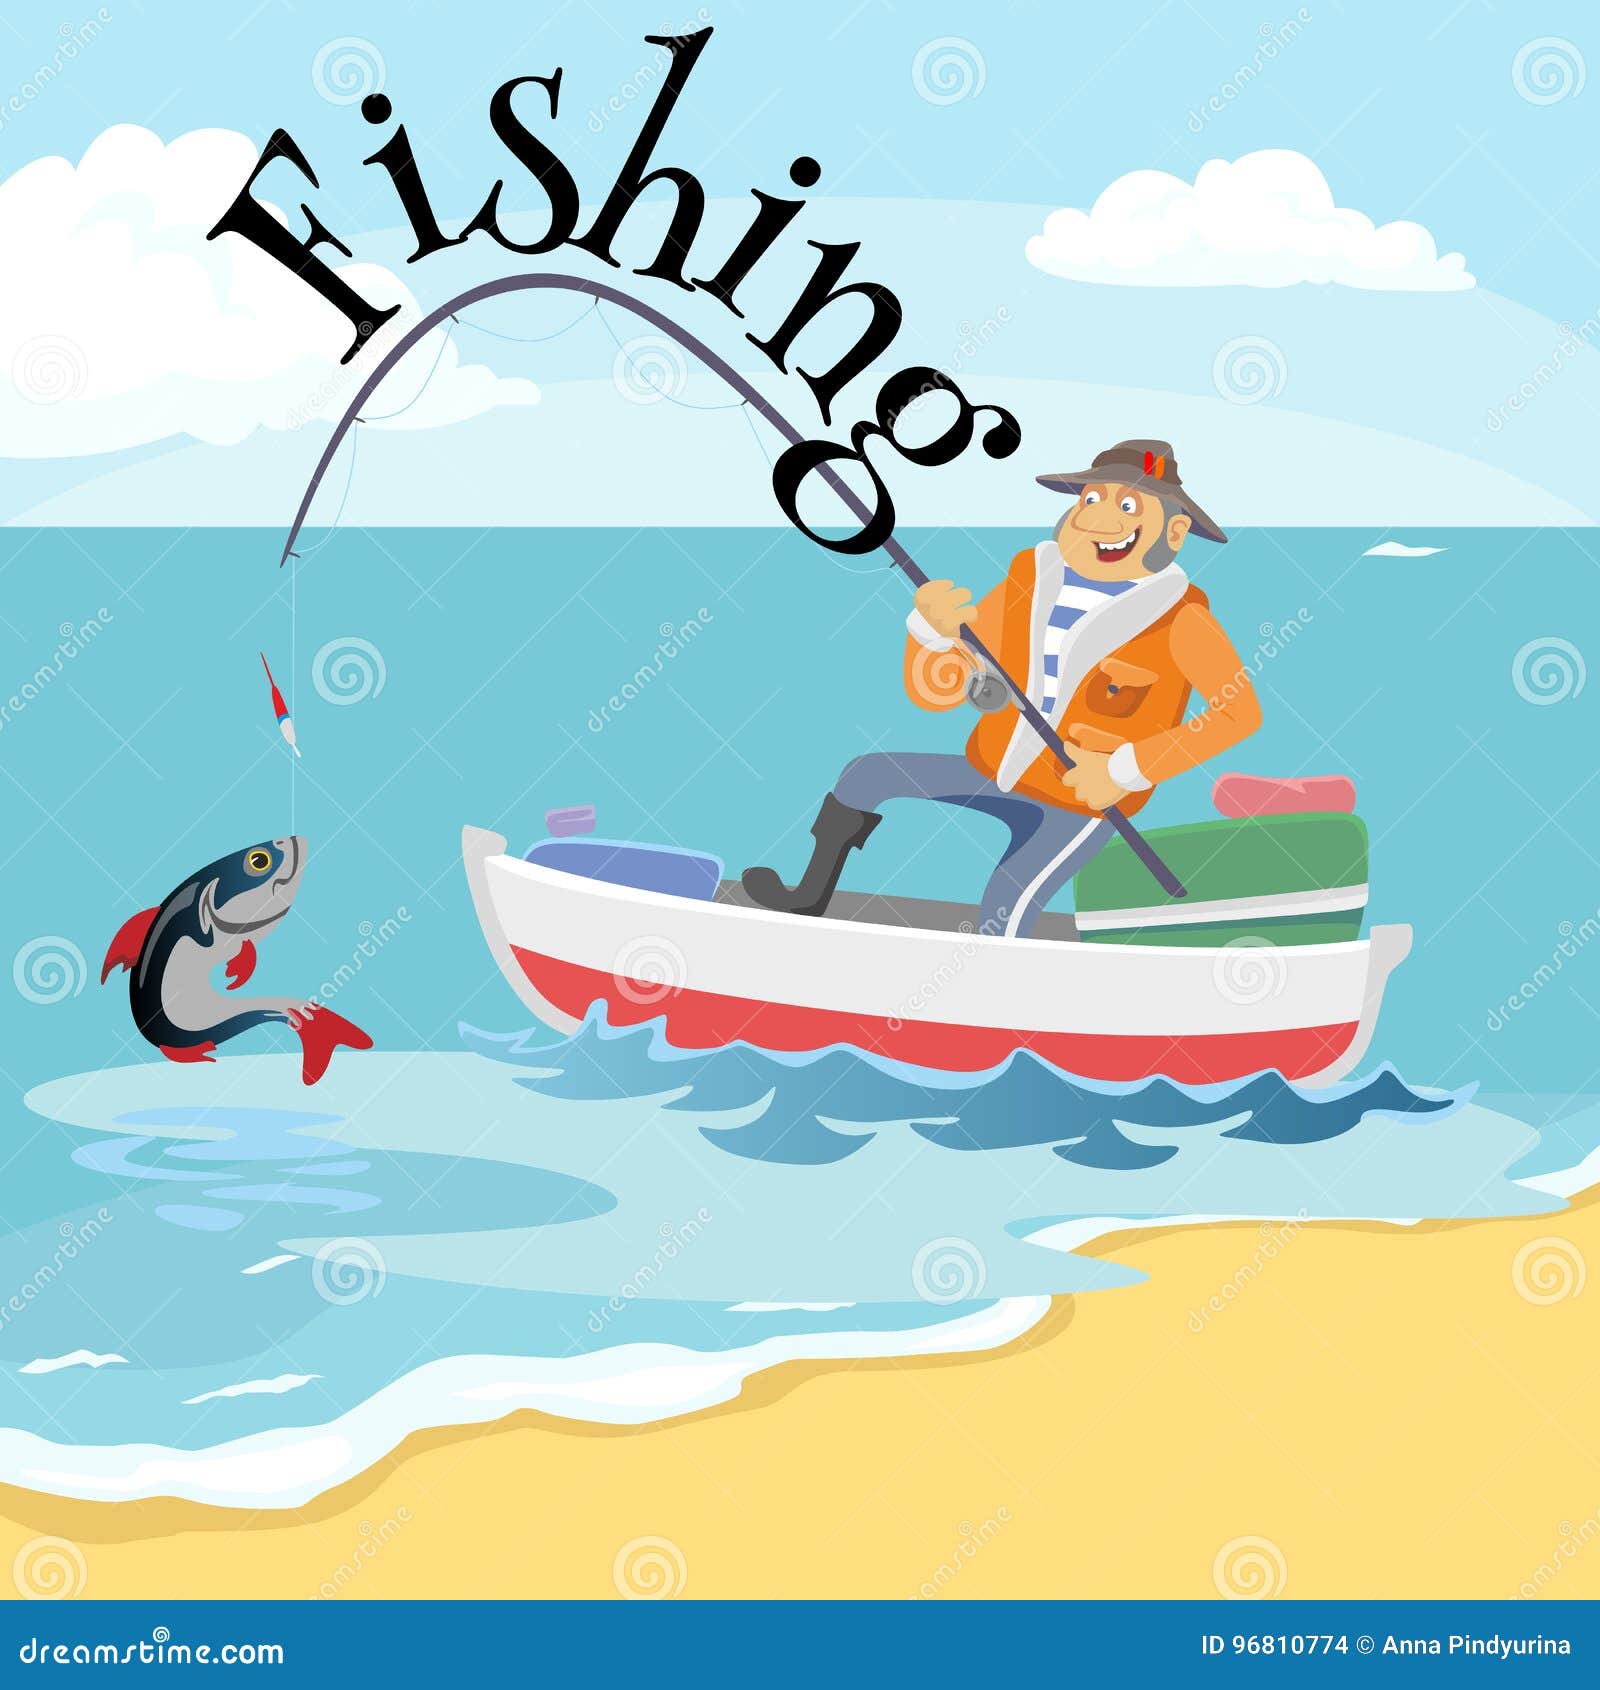 Flat Fisherman Hat Sits on Boat with Trolling Fishing Rod in Hand and  Catches Bucket, Fishman Crocheted Spin into the Stock Vector - Illustration  of background, activity: 96810774